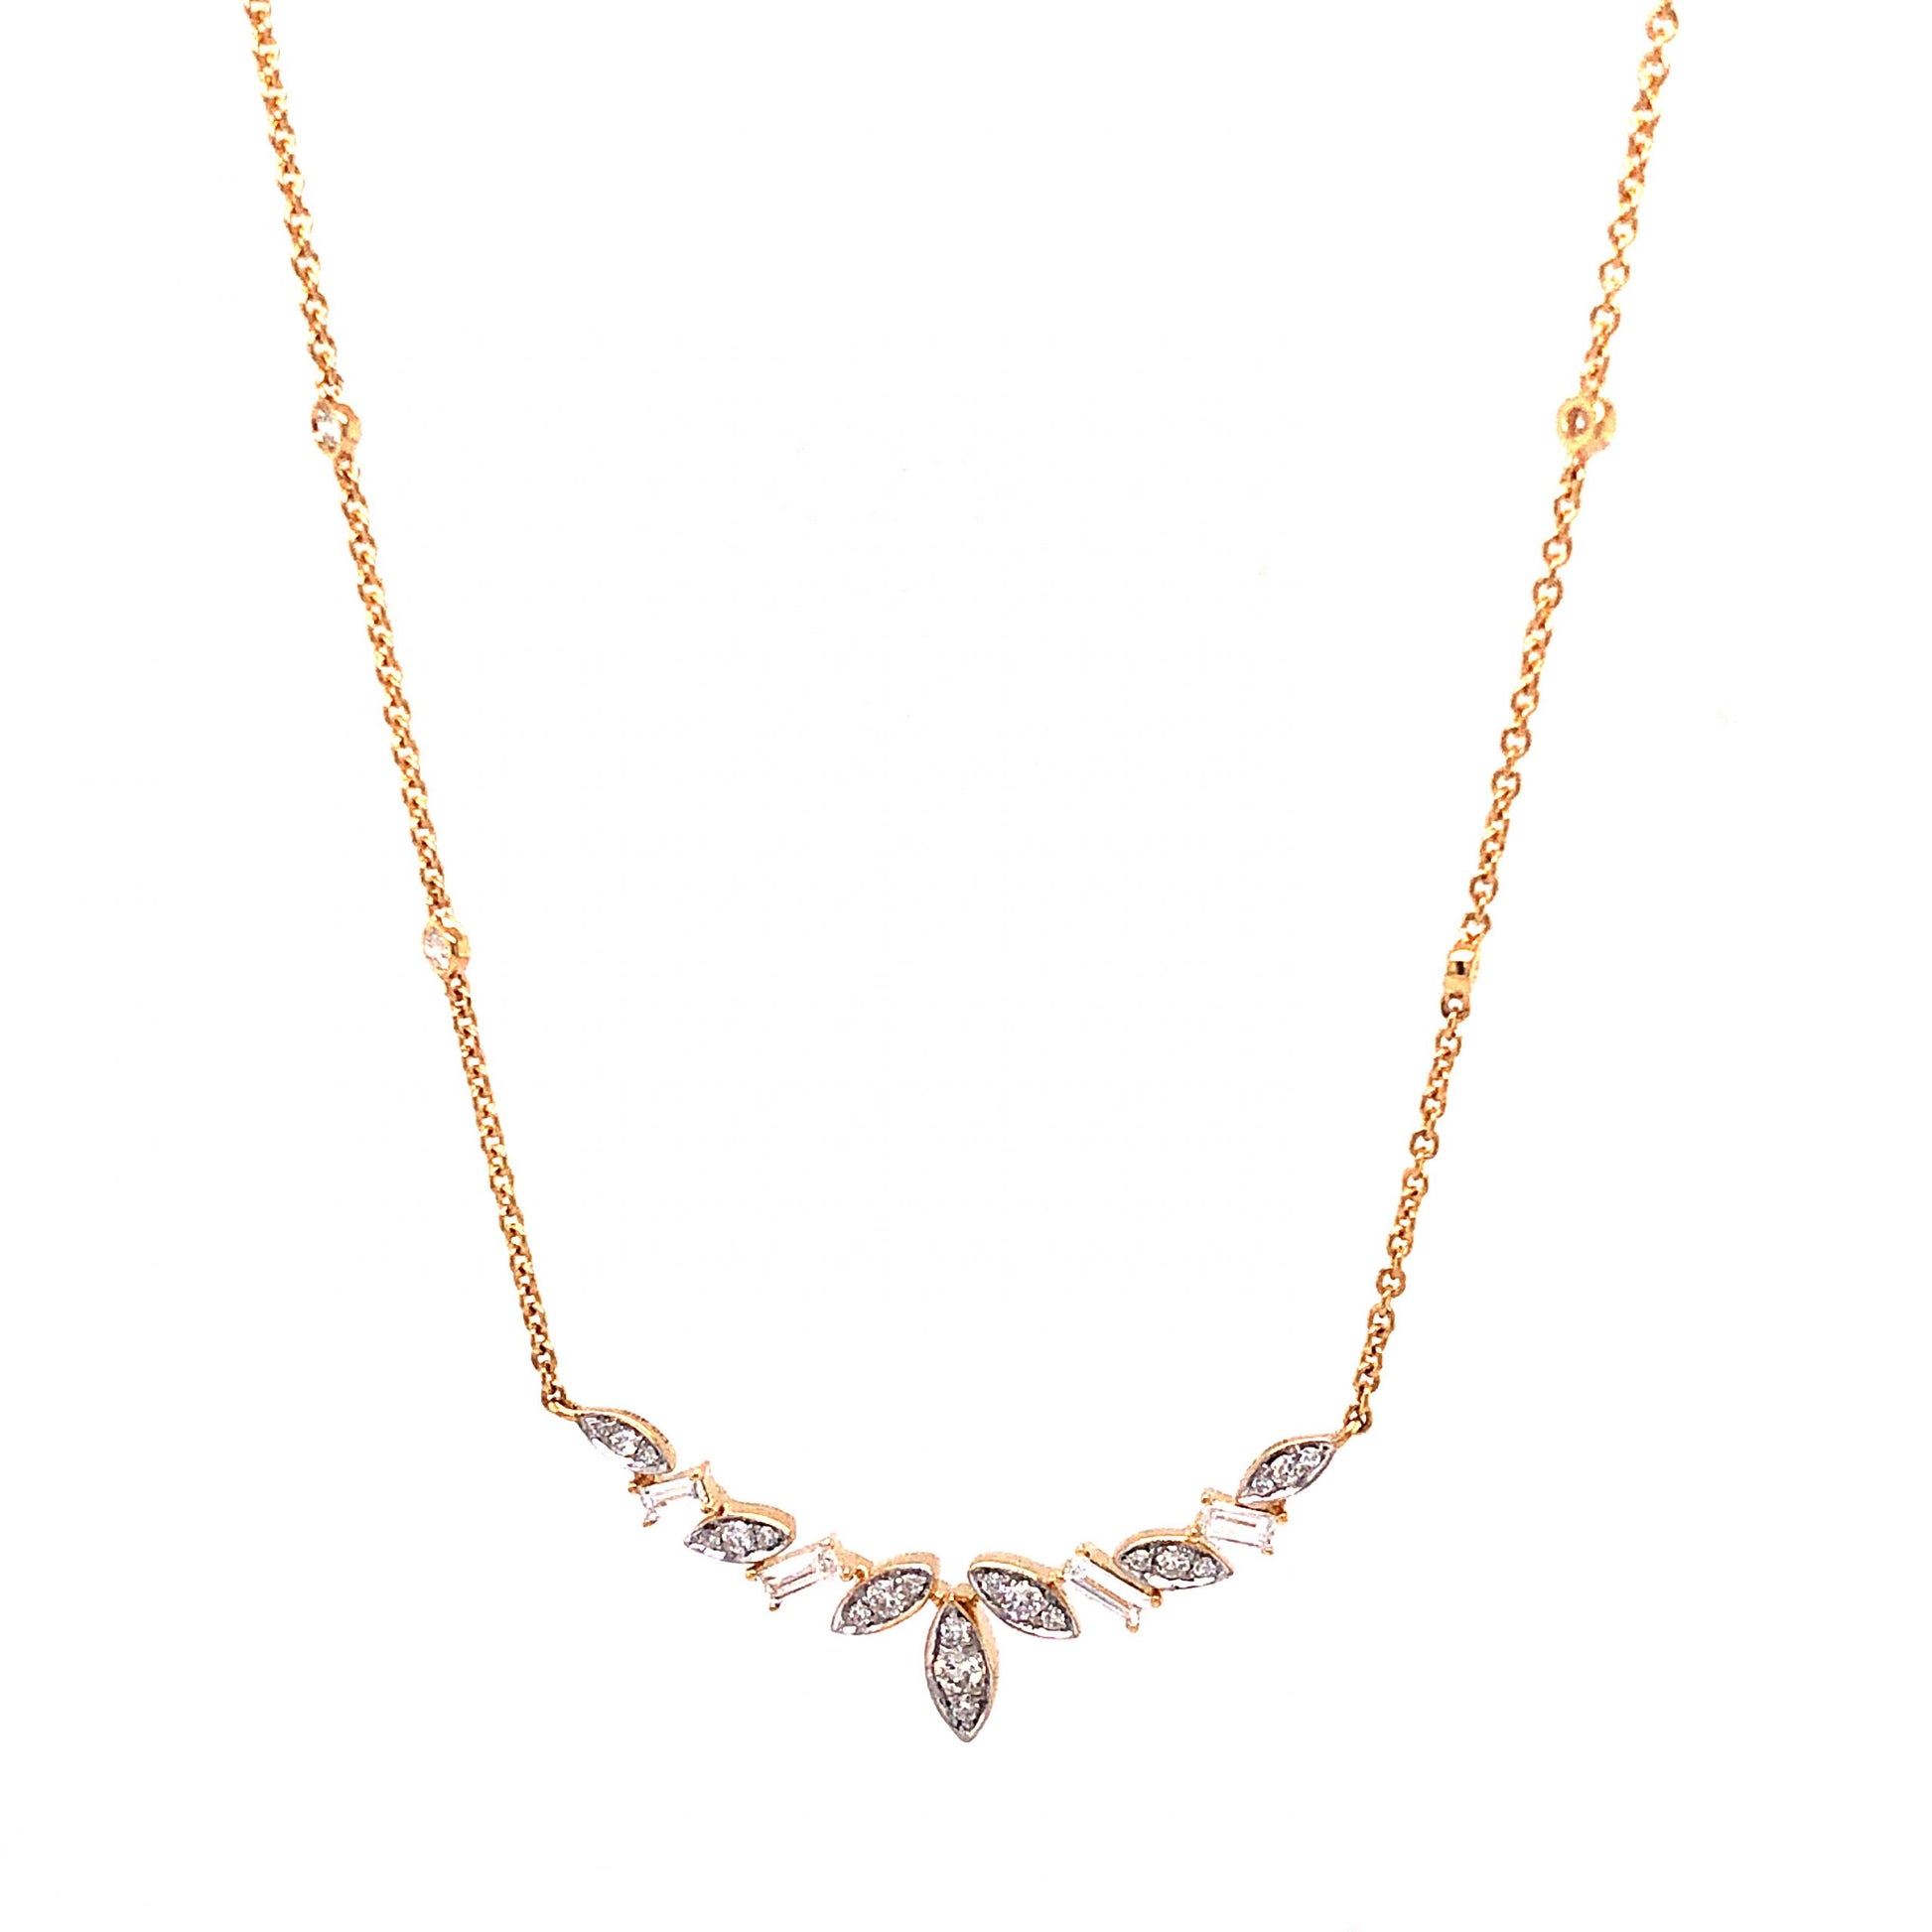 Baguette & Round Diamond Pendant Necklace in 18k Yellow GoldComposition: 18 Karat Yellow GoldTotal Diamond Weight: .47 ctTotal Gram Weight: 4.7 gInscription: 750